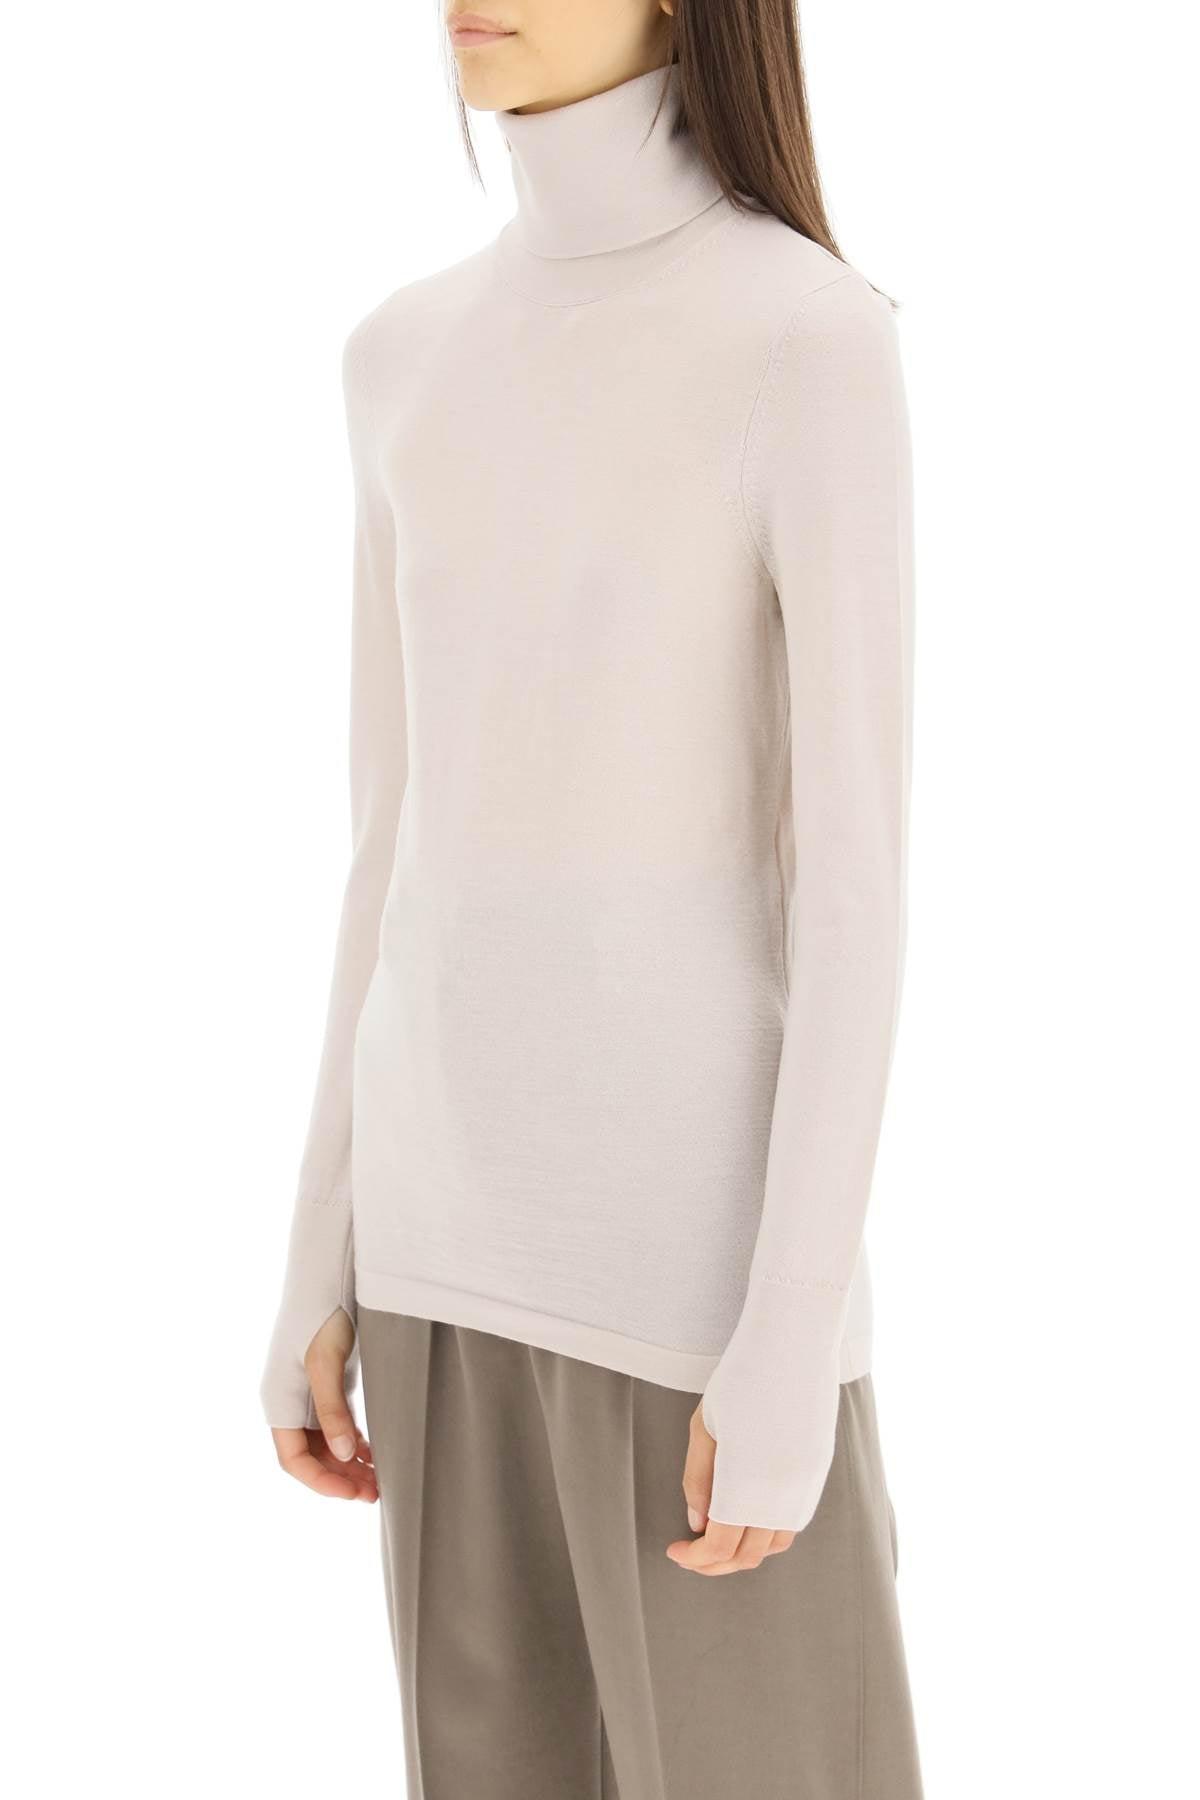 Lemaire Merino Wool Turtleneck Sweater in White | Lyst